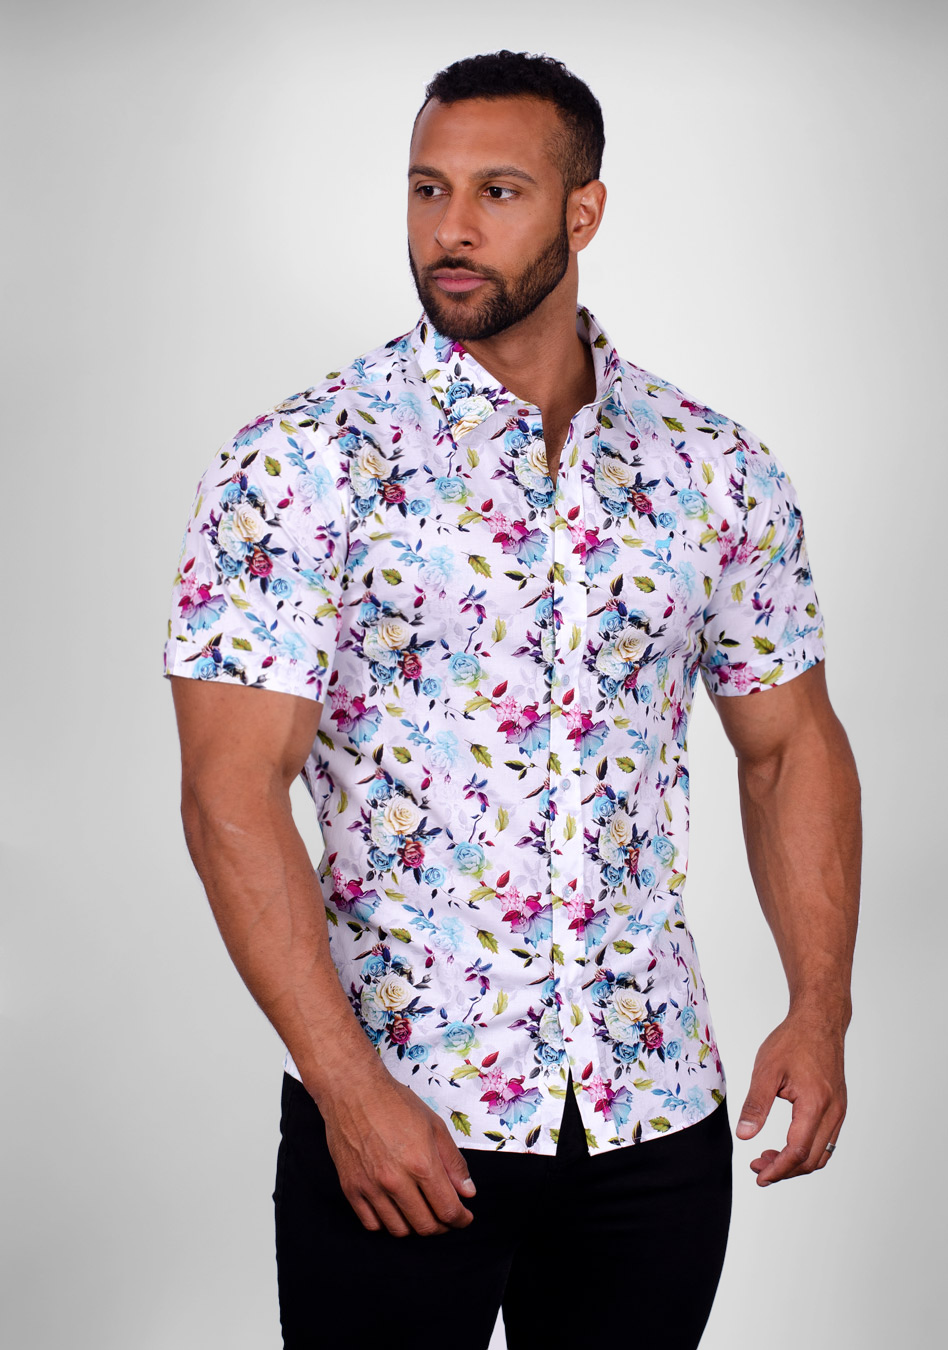 White Floral short sleeve muscle fit shirt on an athletically built model, showcasing the athletic fit design that enhances physique, with stretch fabric for comfort and mobility